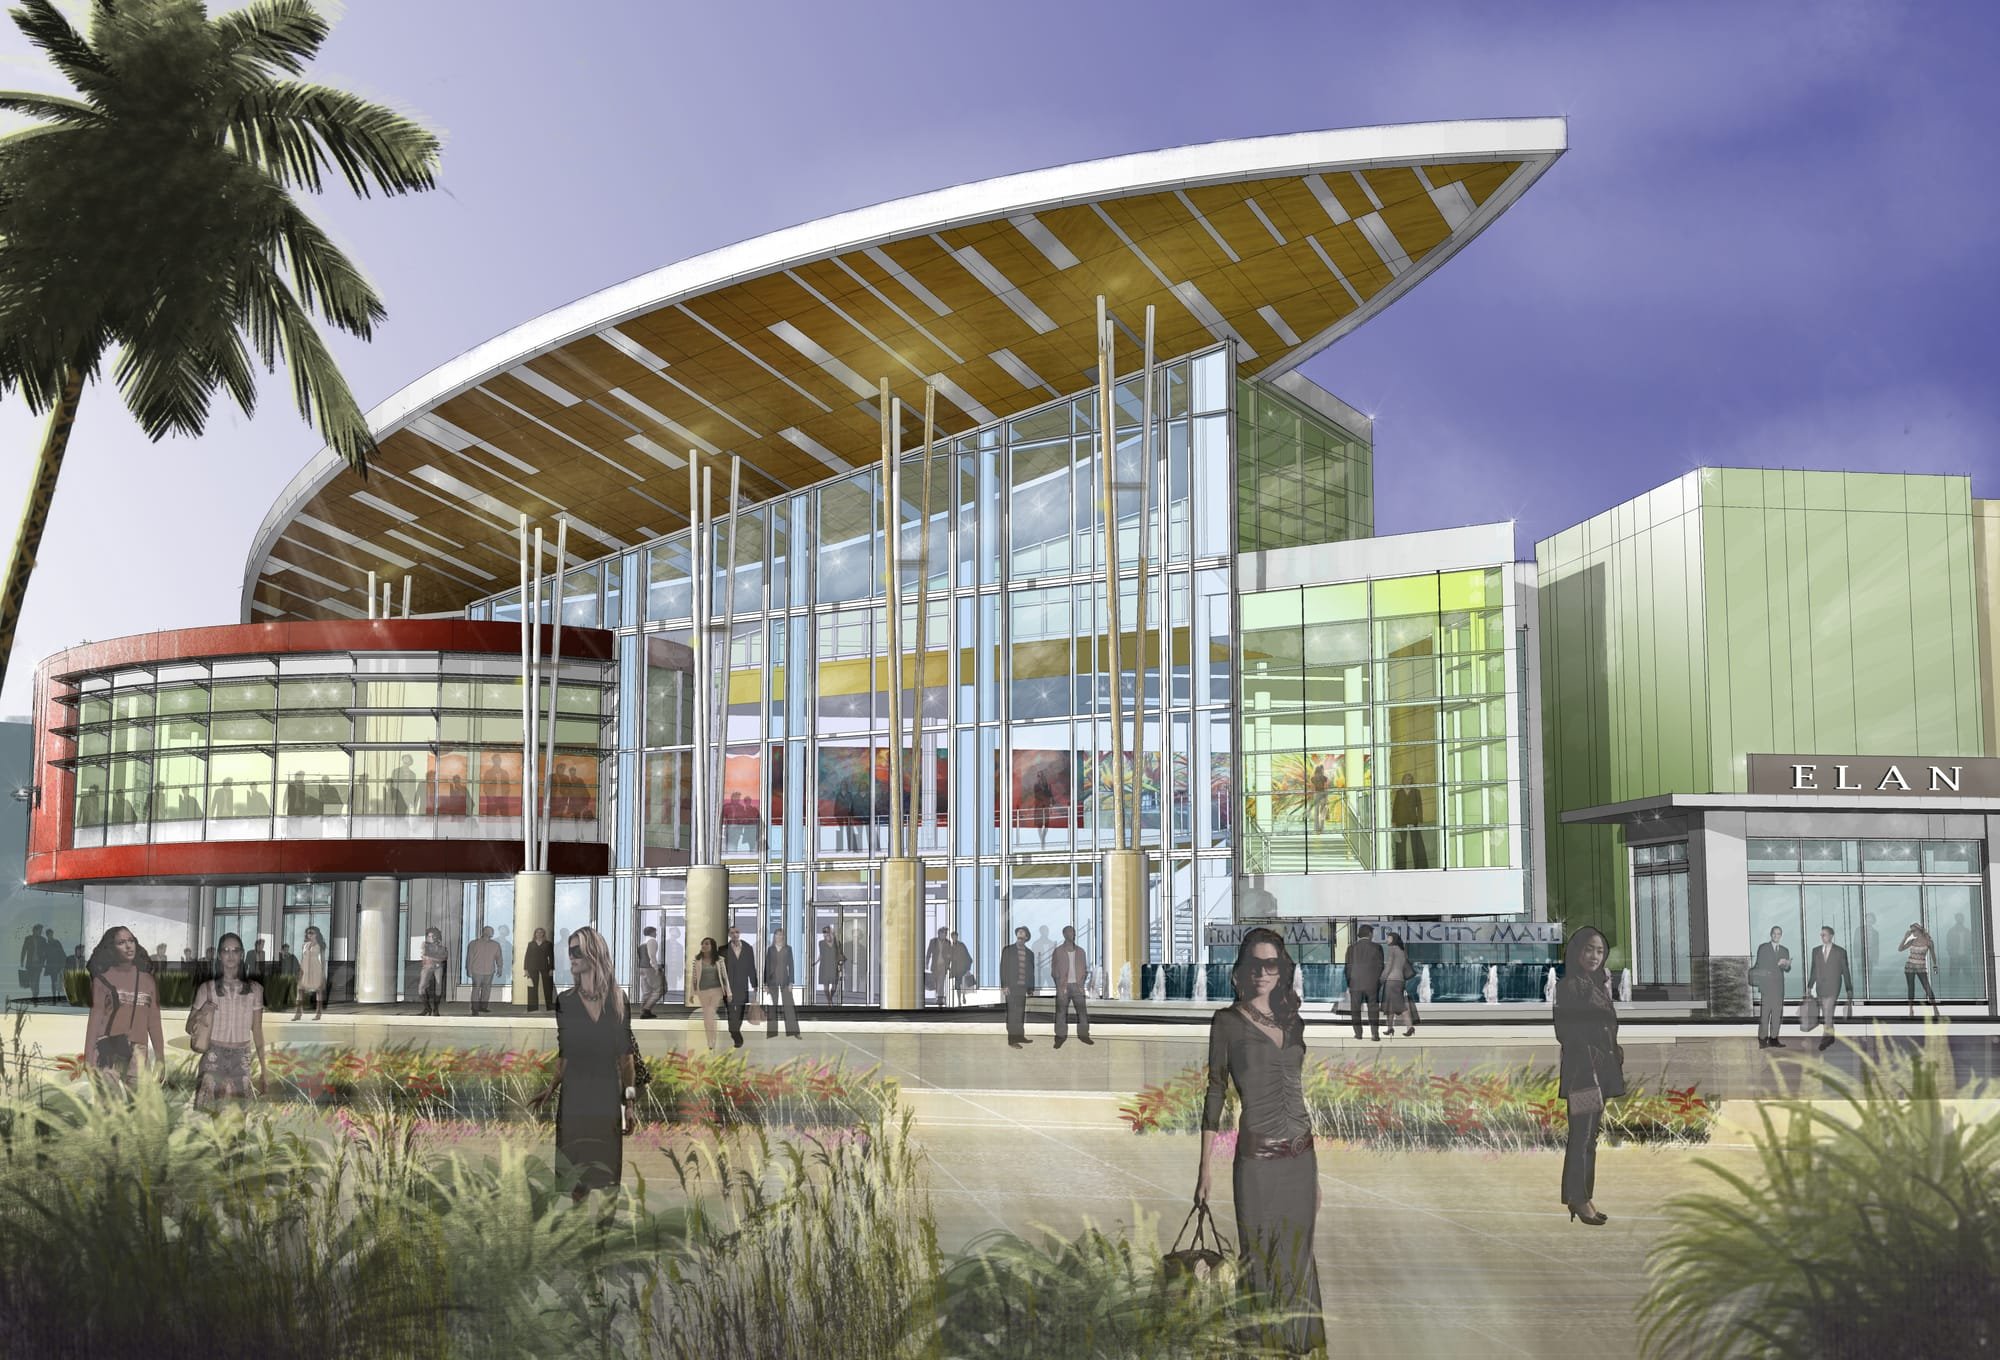 TRINCITY MALL EXPANSION ENTRY